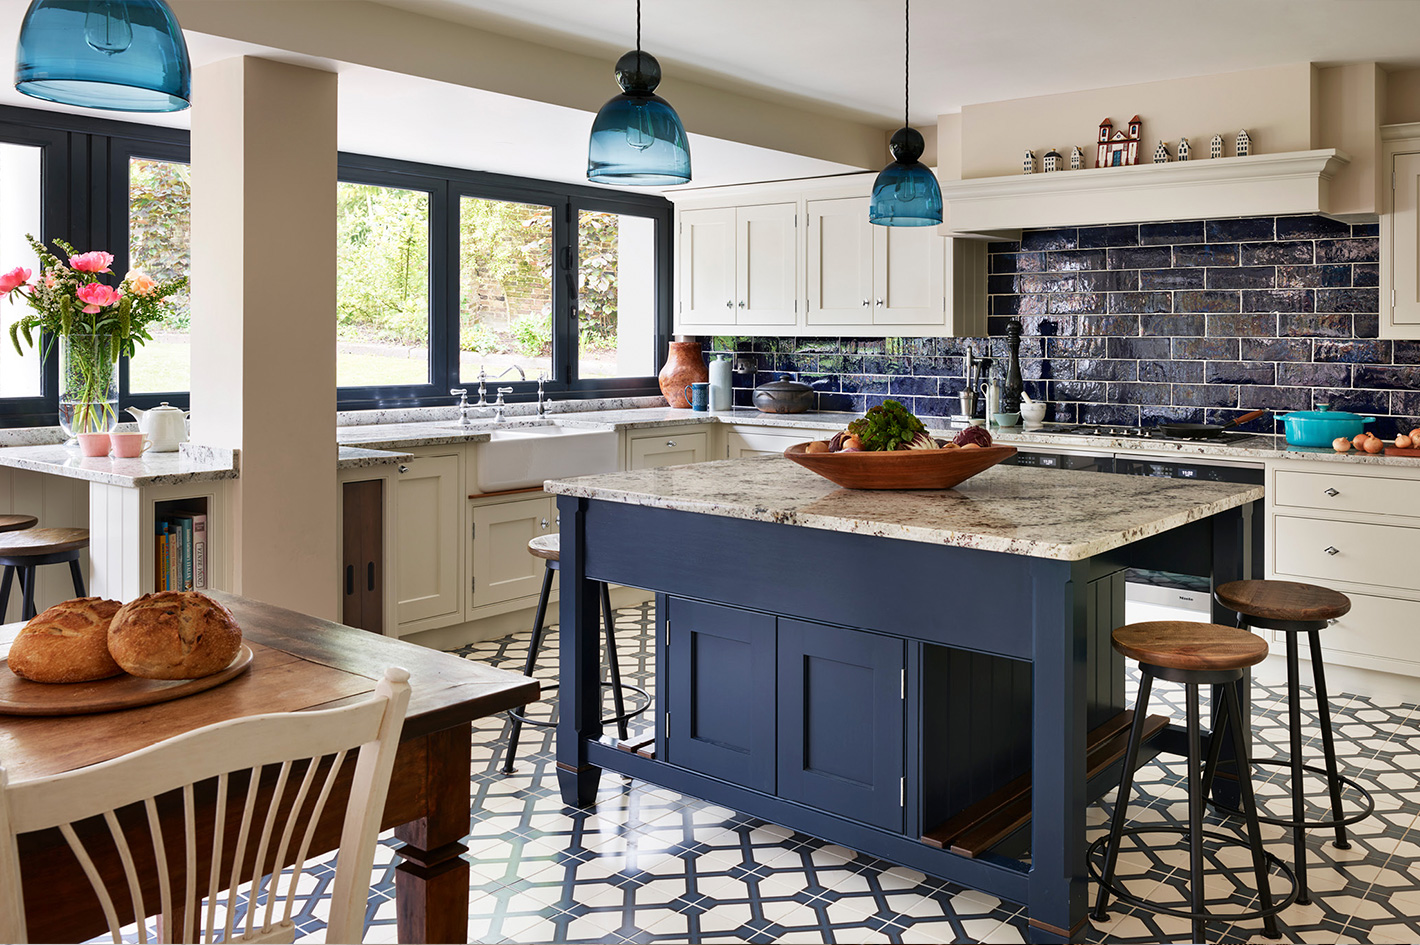 20 kitchen ideas to inspire your next upgrade   Real Homes